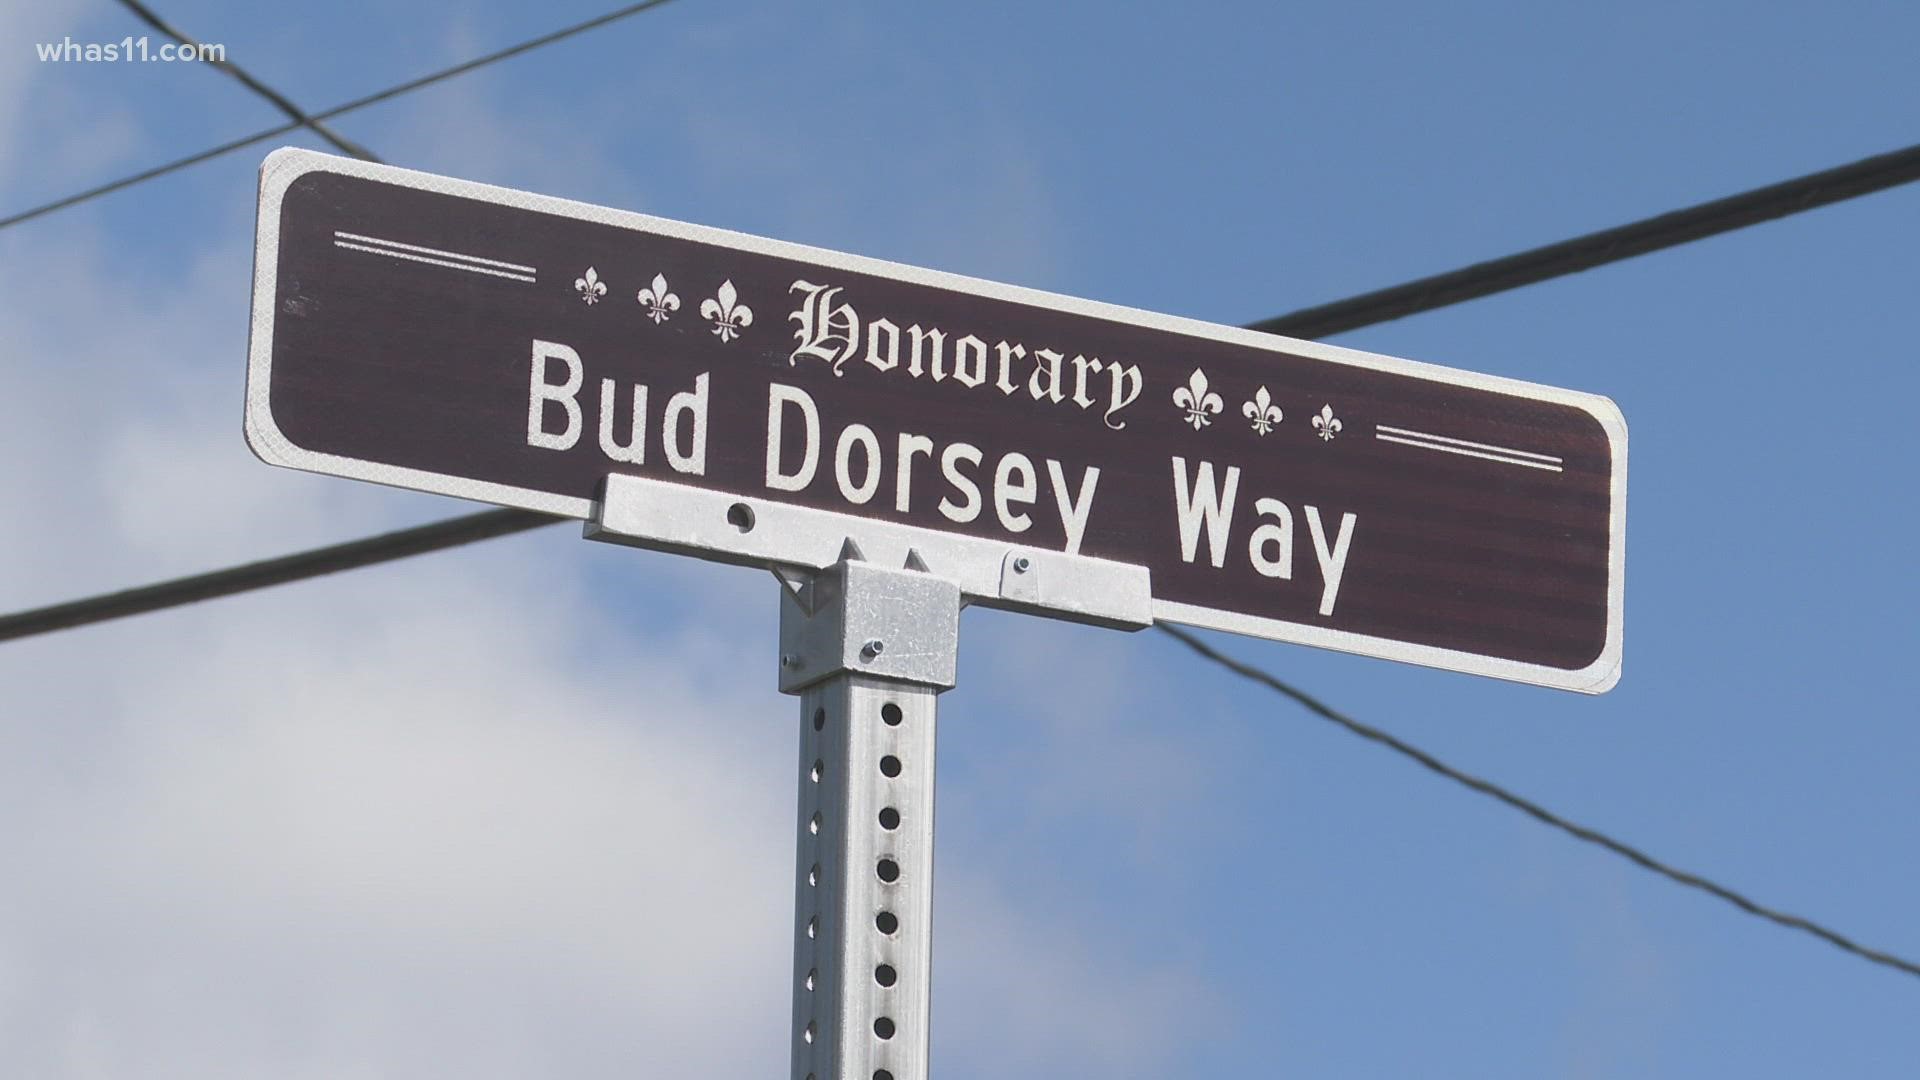 Charles 'Bud' Dorsey captured the evolution of west Louisville over many years from behind a camera and his photography work meant so much to so many.